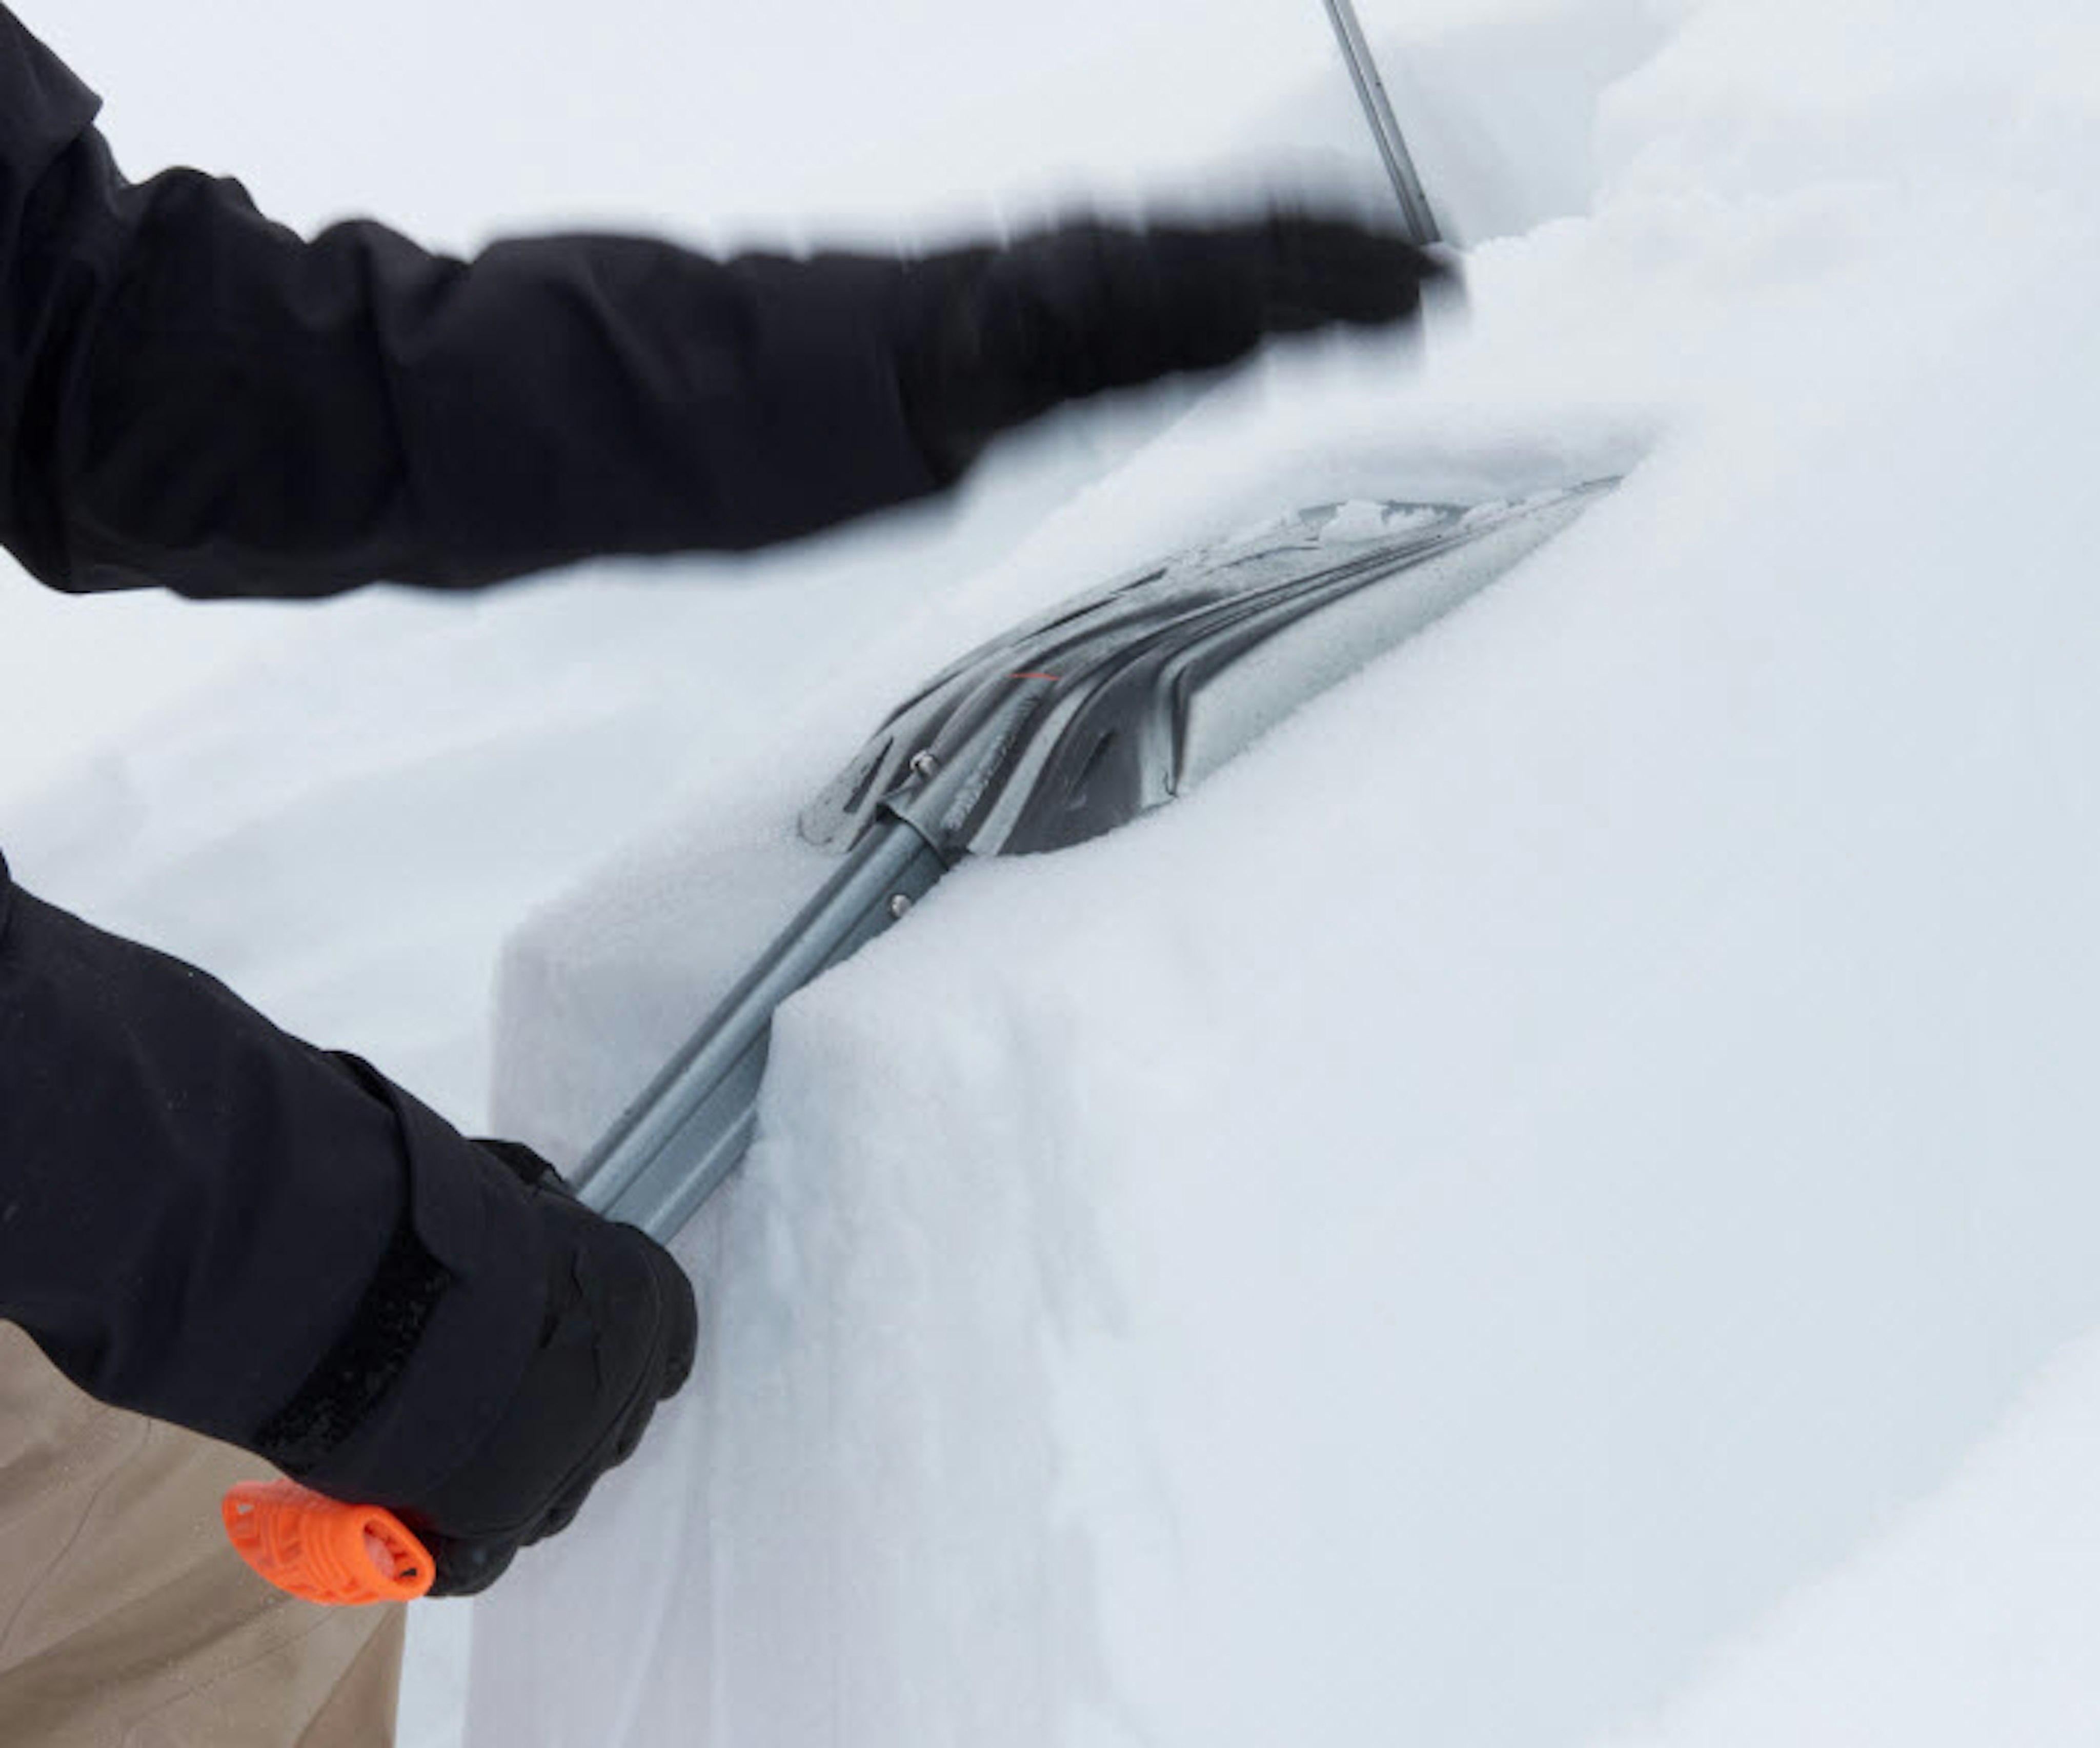 A person clearing a thick layer of snow with a plastic snow shovel on a snowy day, wearing Mammut outdoor gear.